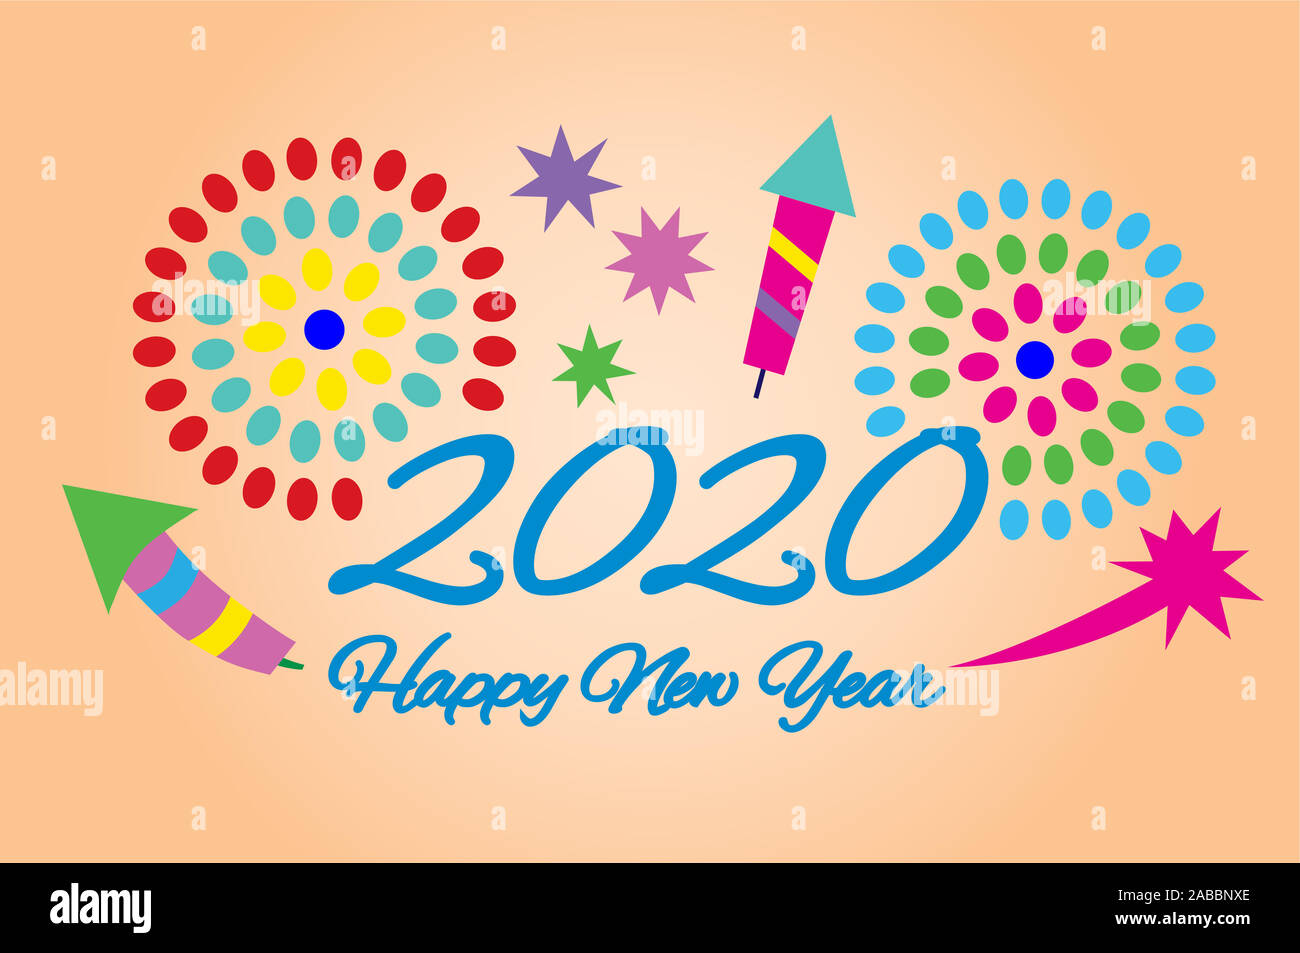 Happy New Year Card. Inscription Happy New Year 2020 and fireworks in vector illustration. Stock Photo